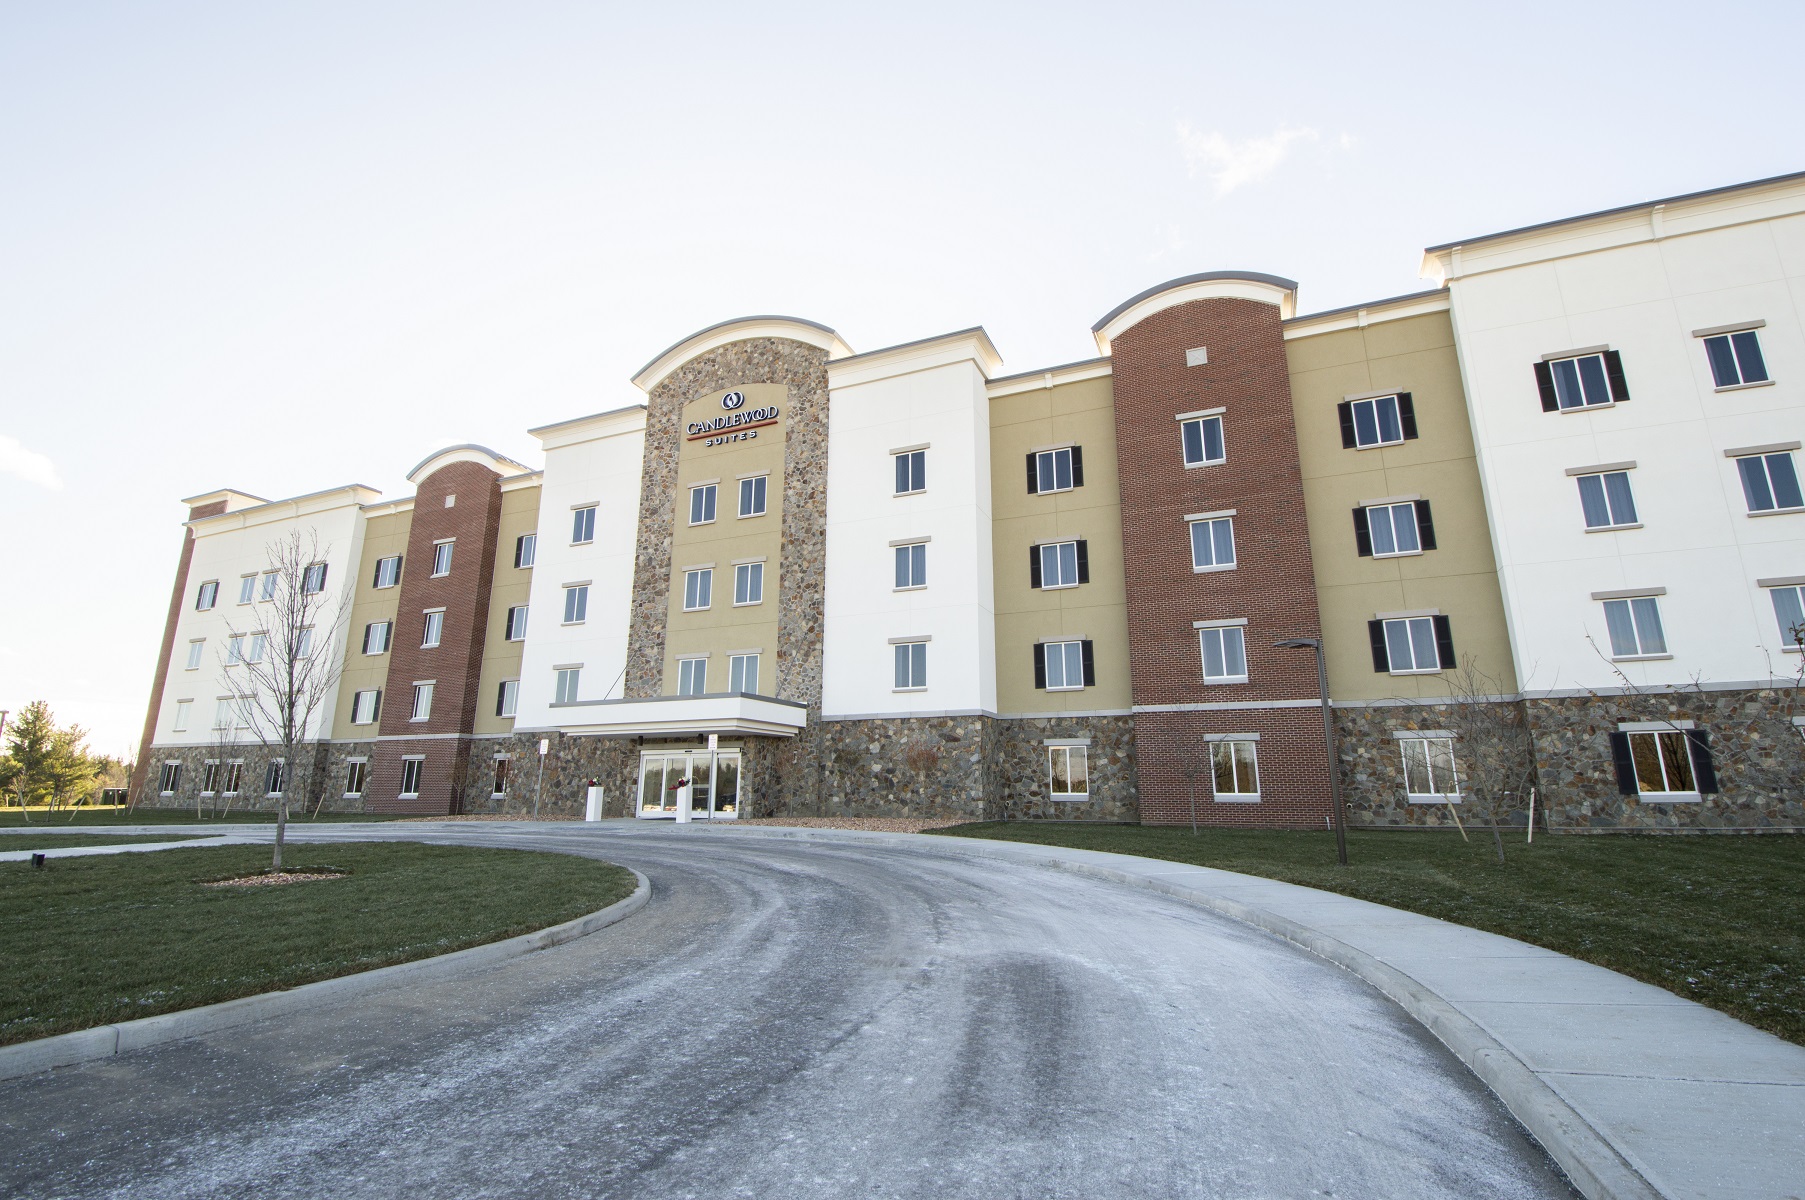 The property which opened on Fort Drum in upstate New York is the second mid-sized hotel in the country constructed using C